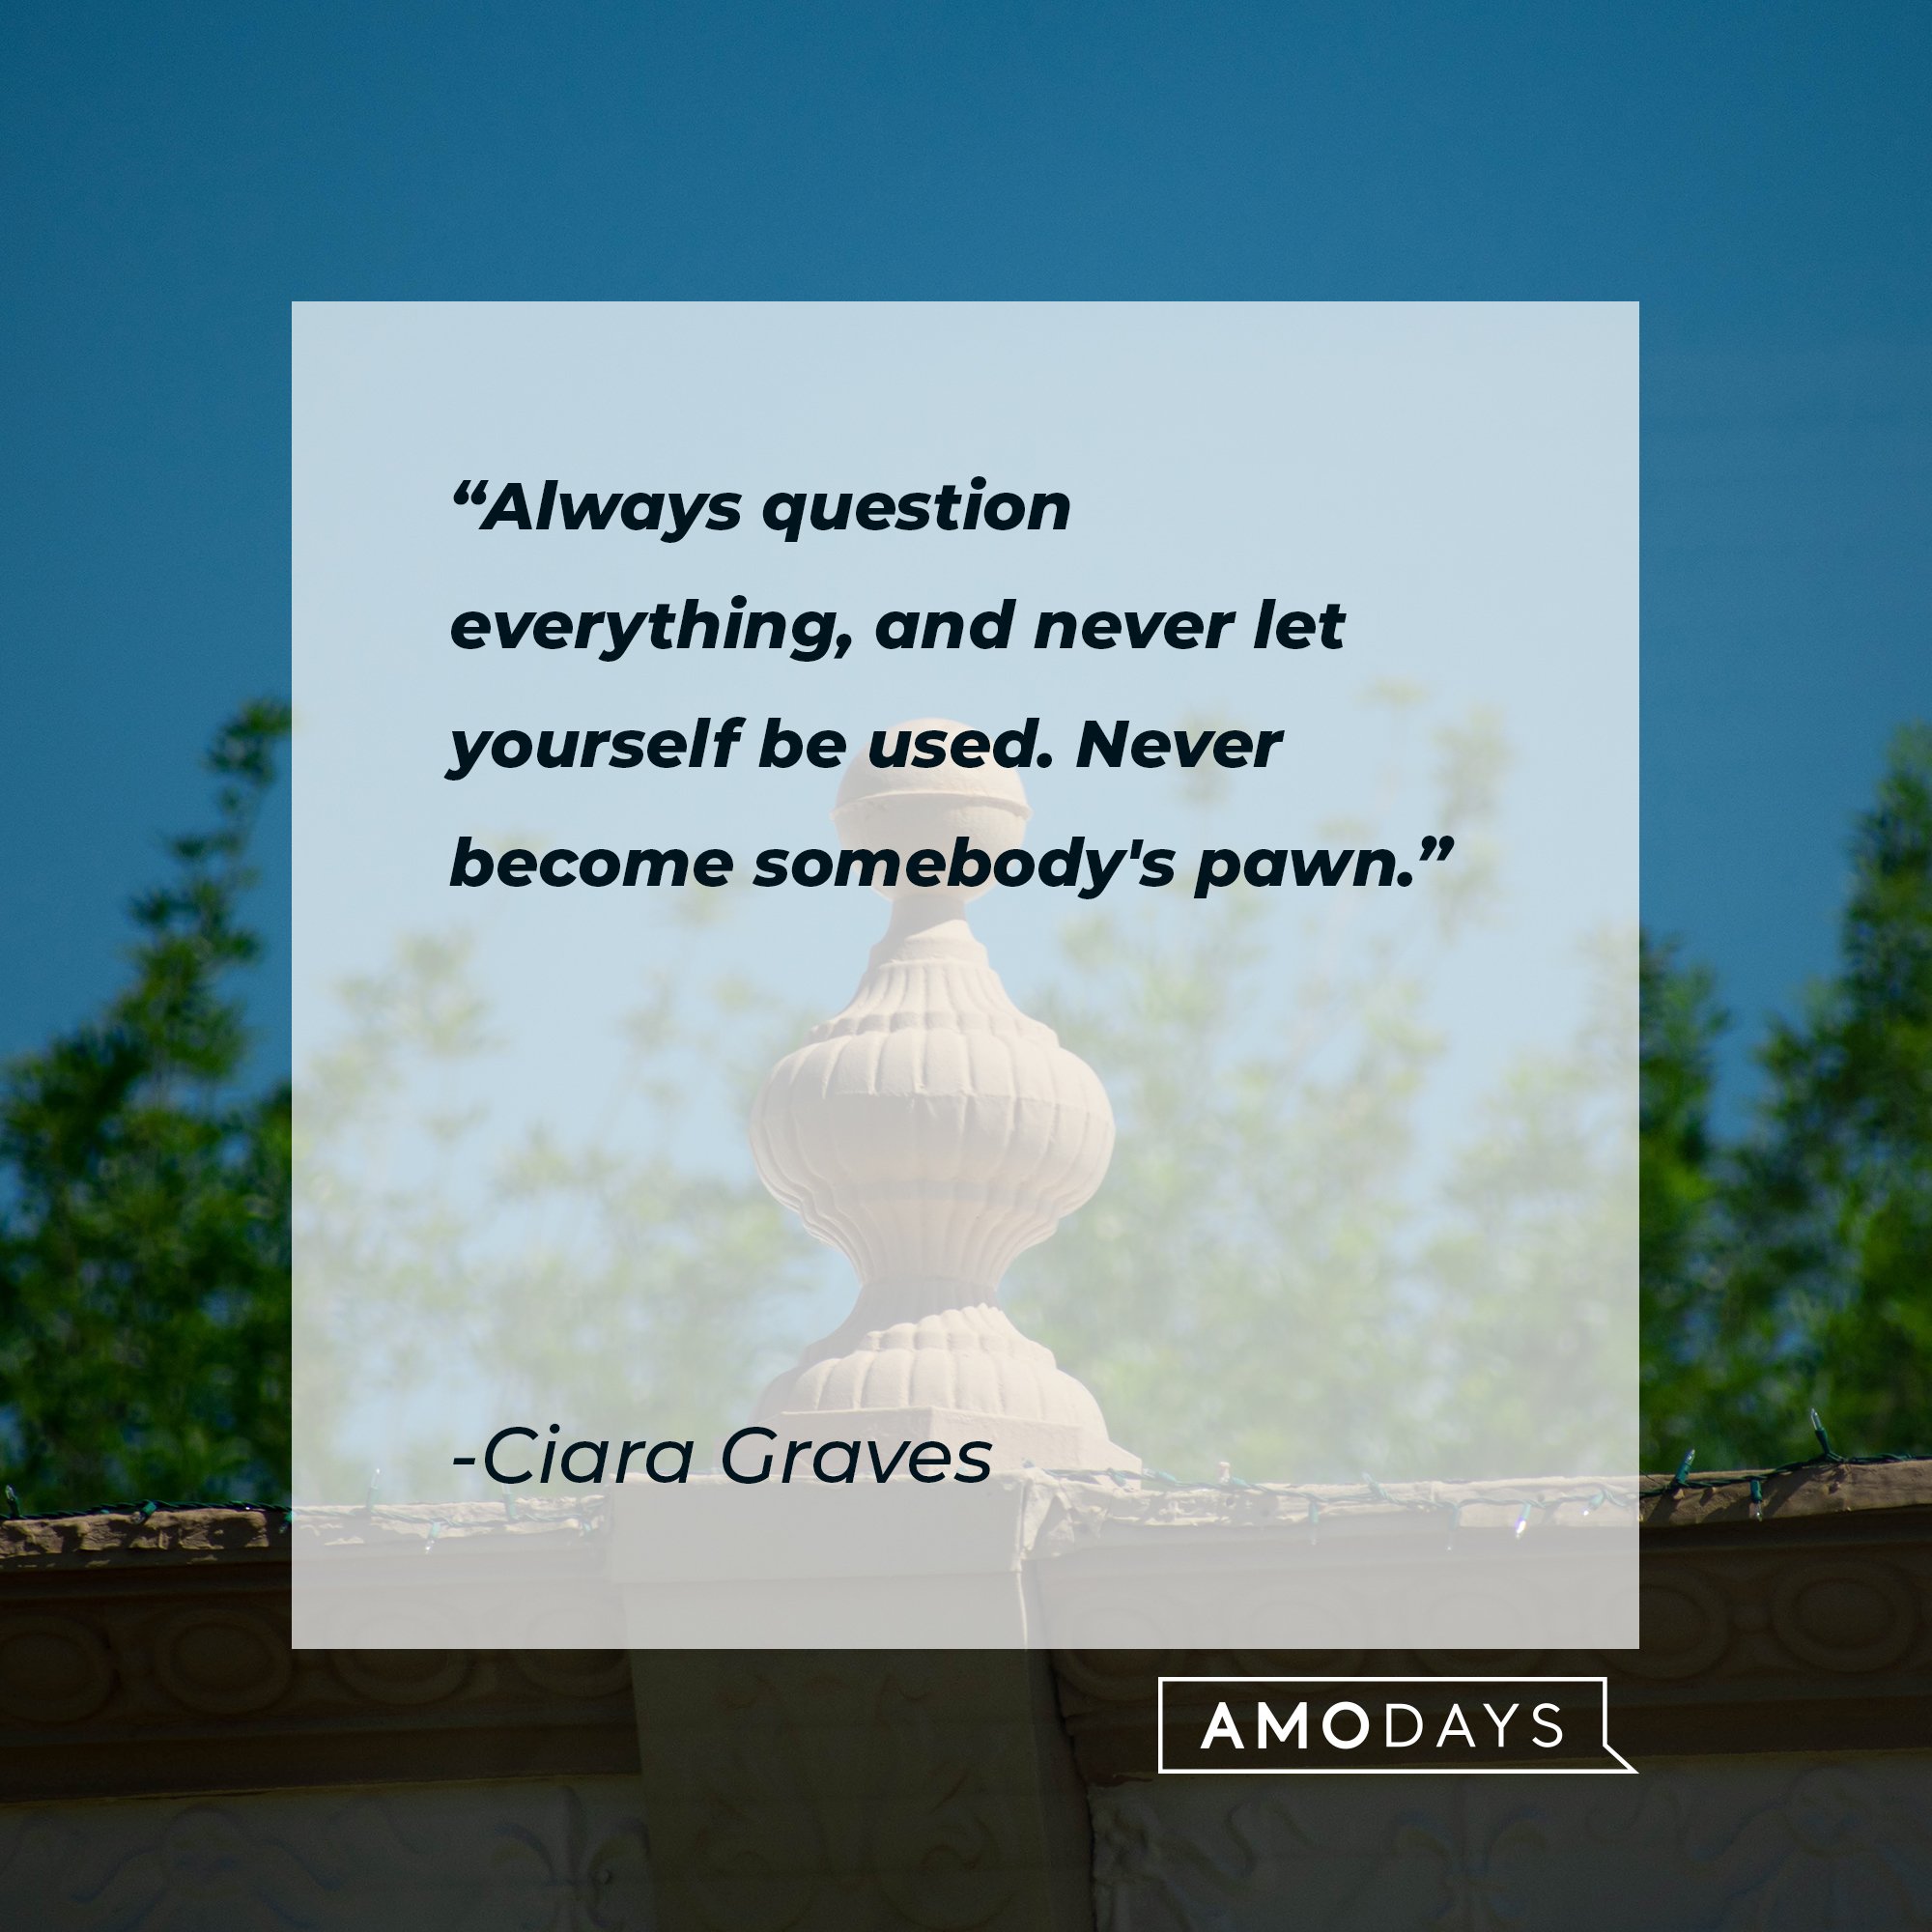 Ciara Graves' quote: "Always question everything, and never let yourself be used. Never become somebody's pawn." | Image: AmoDays